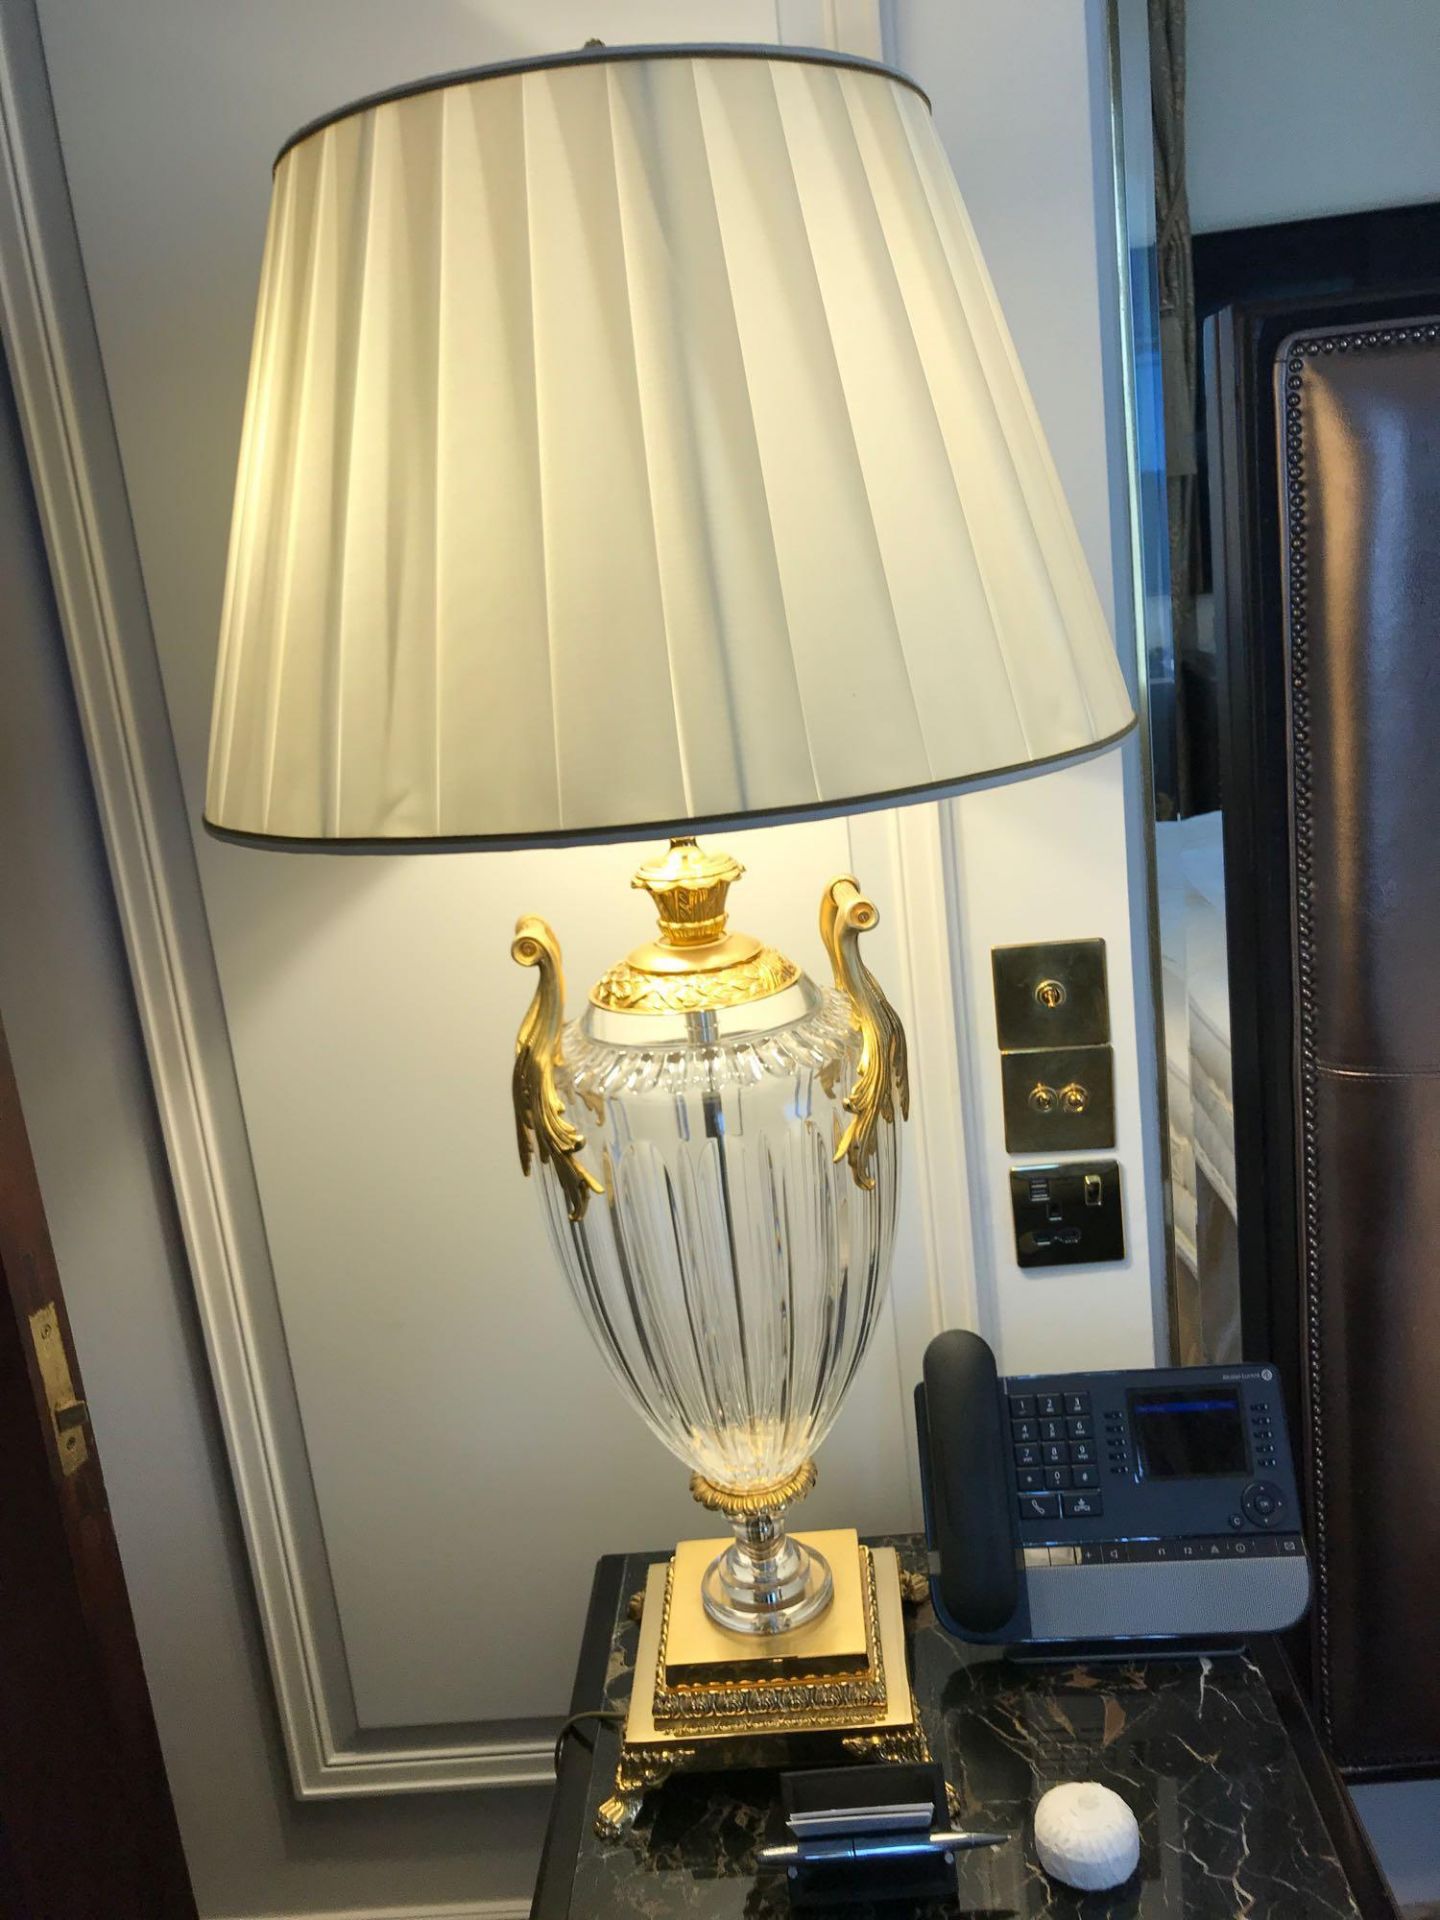 A Pair Of Laudarte Crystal Table Lamps Inserts And Decorations In 24ct Gold With Shade 95cm Tall - Image 2 of 2